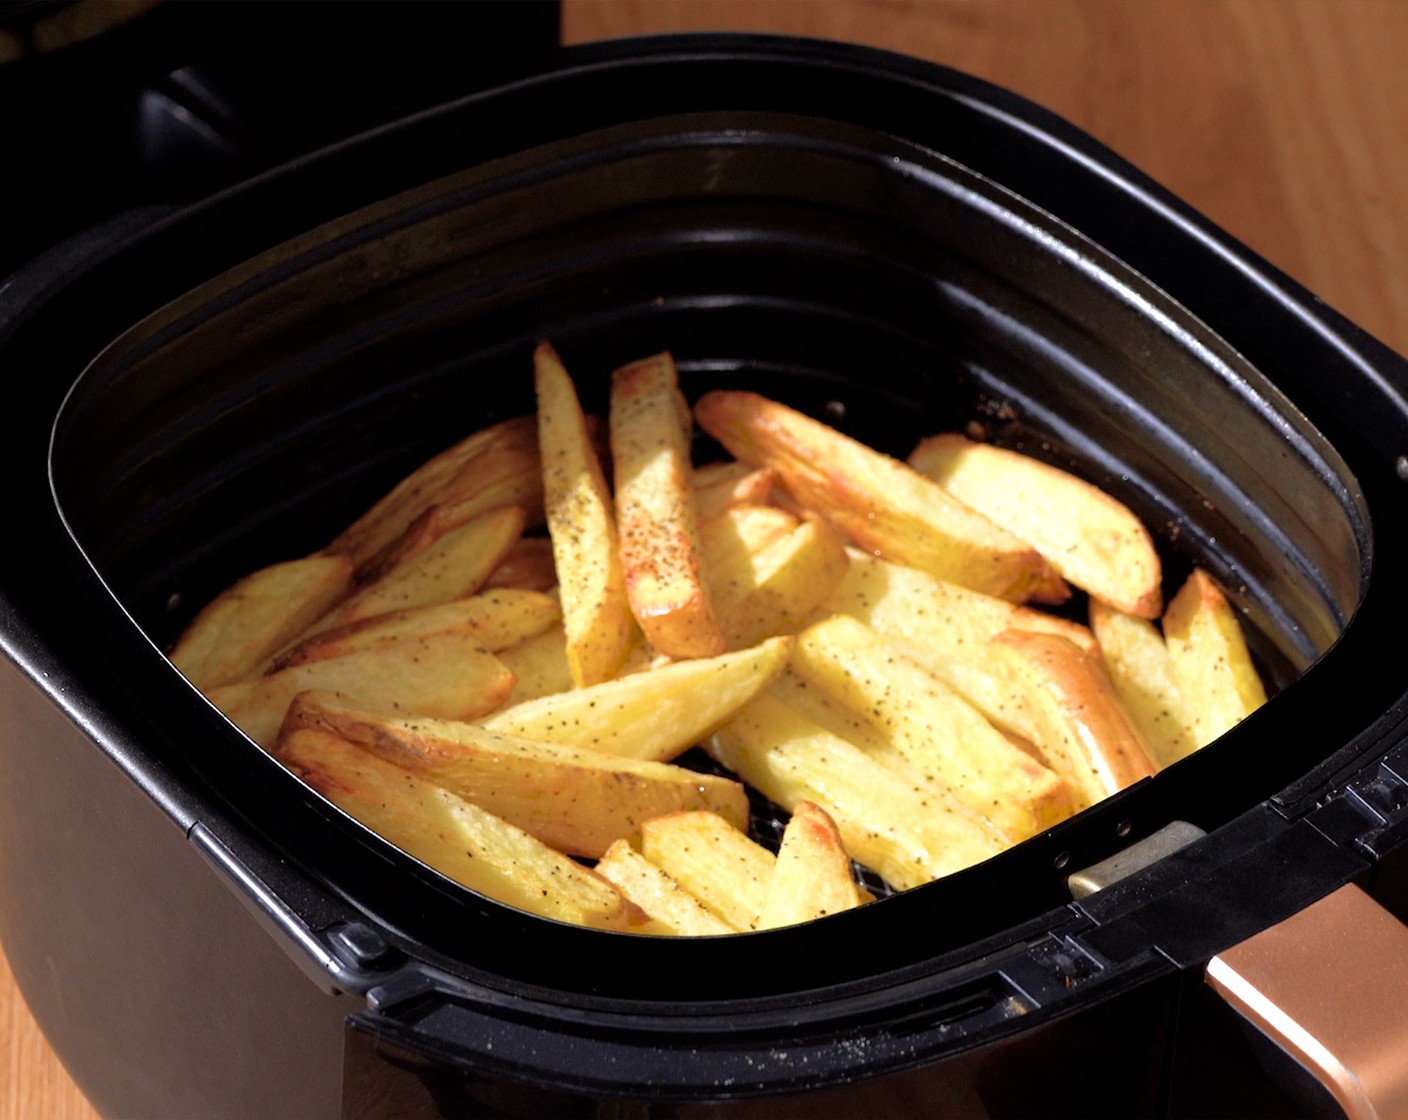 step 6 After 12 minutes, pull out the basket, sprinkle with seasoning, and toss evenly with the rest of the Cooking Oil (2 Tbsp). Continue cooking for 10-12 minutes more, depending on the thickness of the fries, or until golden brown.